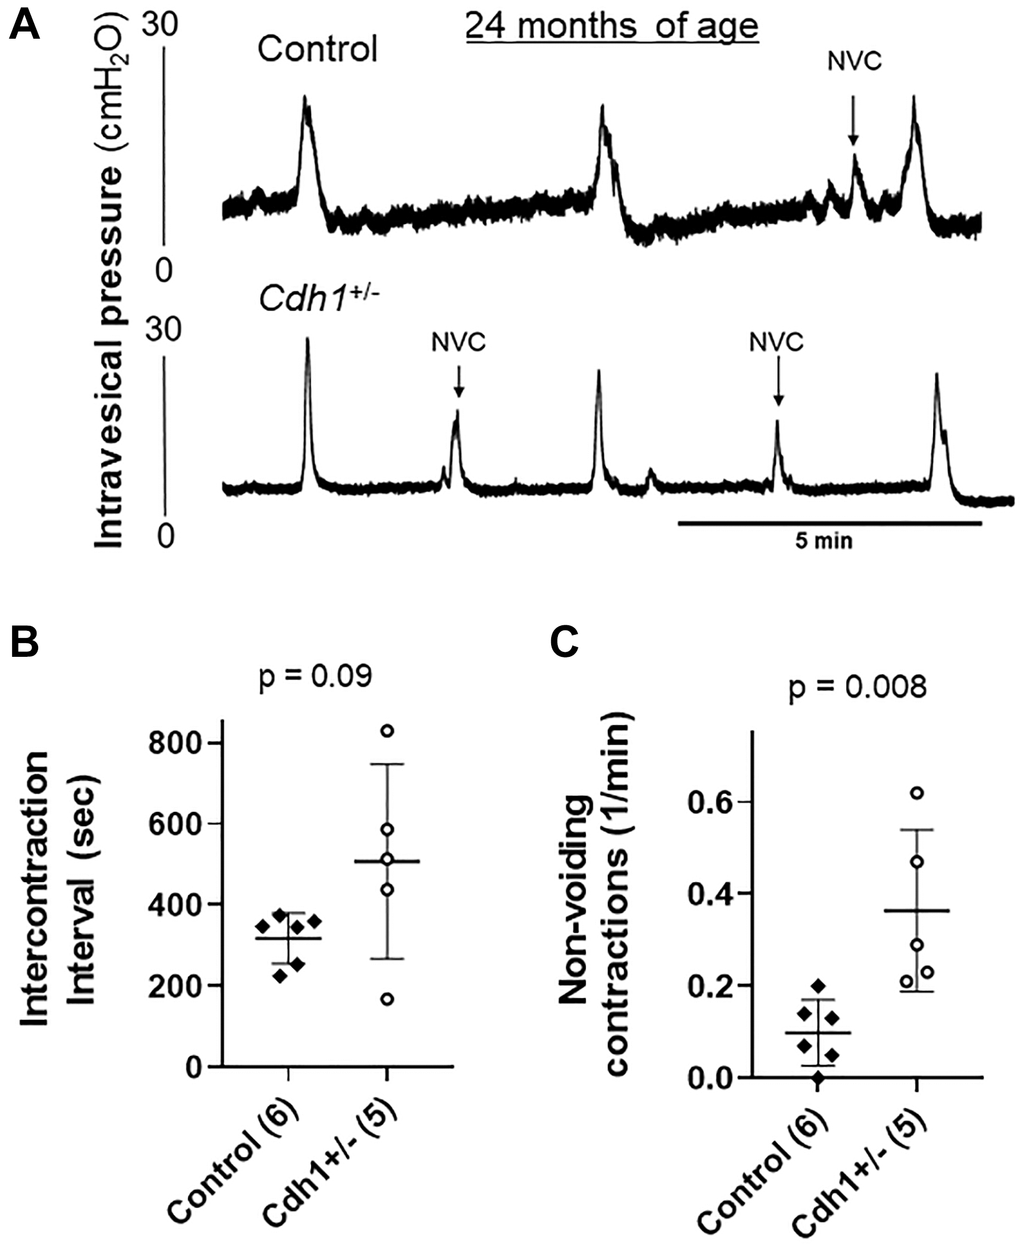 Impact of prostate-specific E-cadherin deficiency on bladder cystometry in mice analyzed at 24 months of age. (A) Representative cystometric tracings for Control and Cdh1+/- mice at 24 months of age. (B) Intercontraction interval. (C) Number of non-voiding contractions (NVC). Number of mice in each group in parentheses.